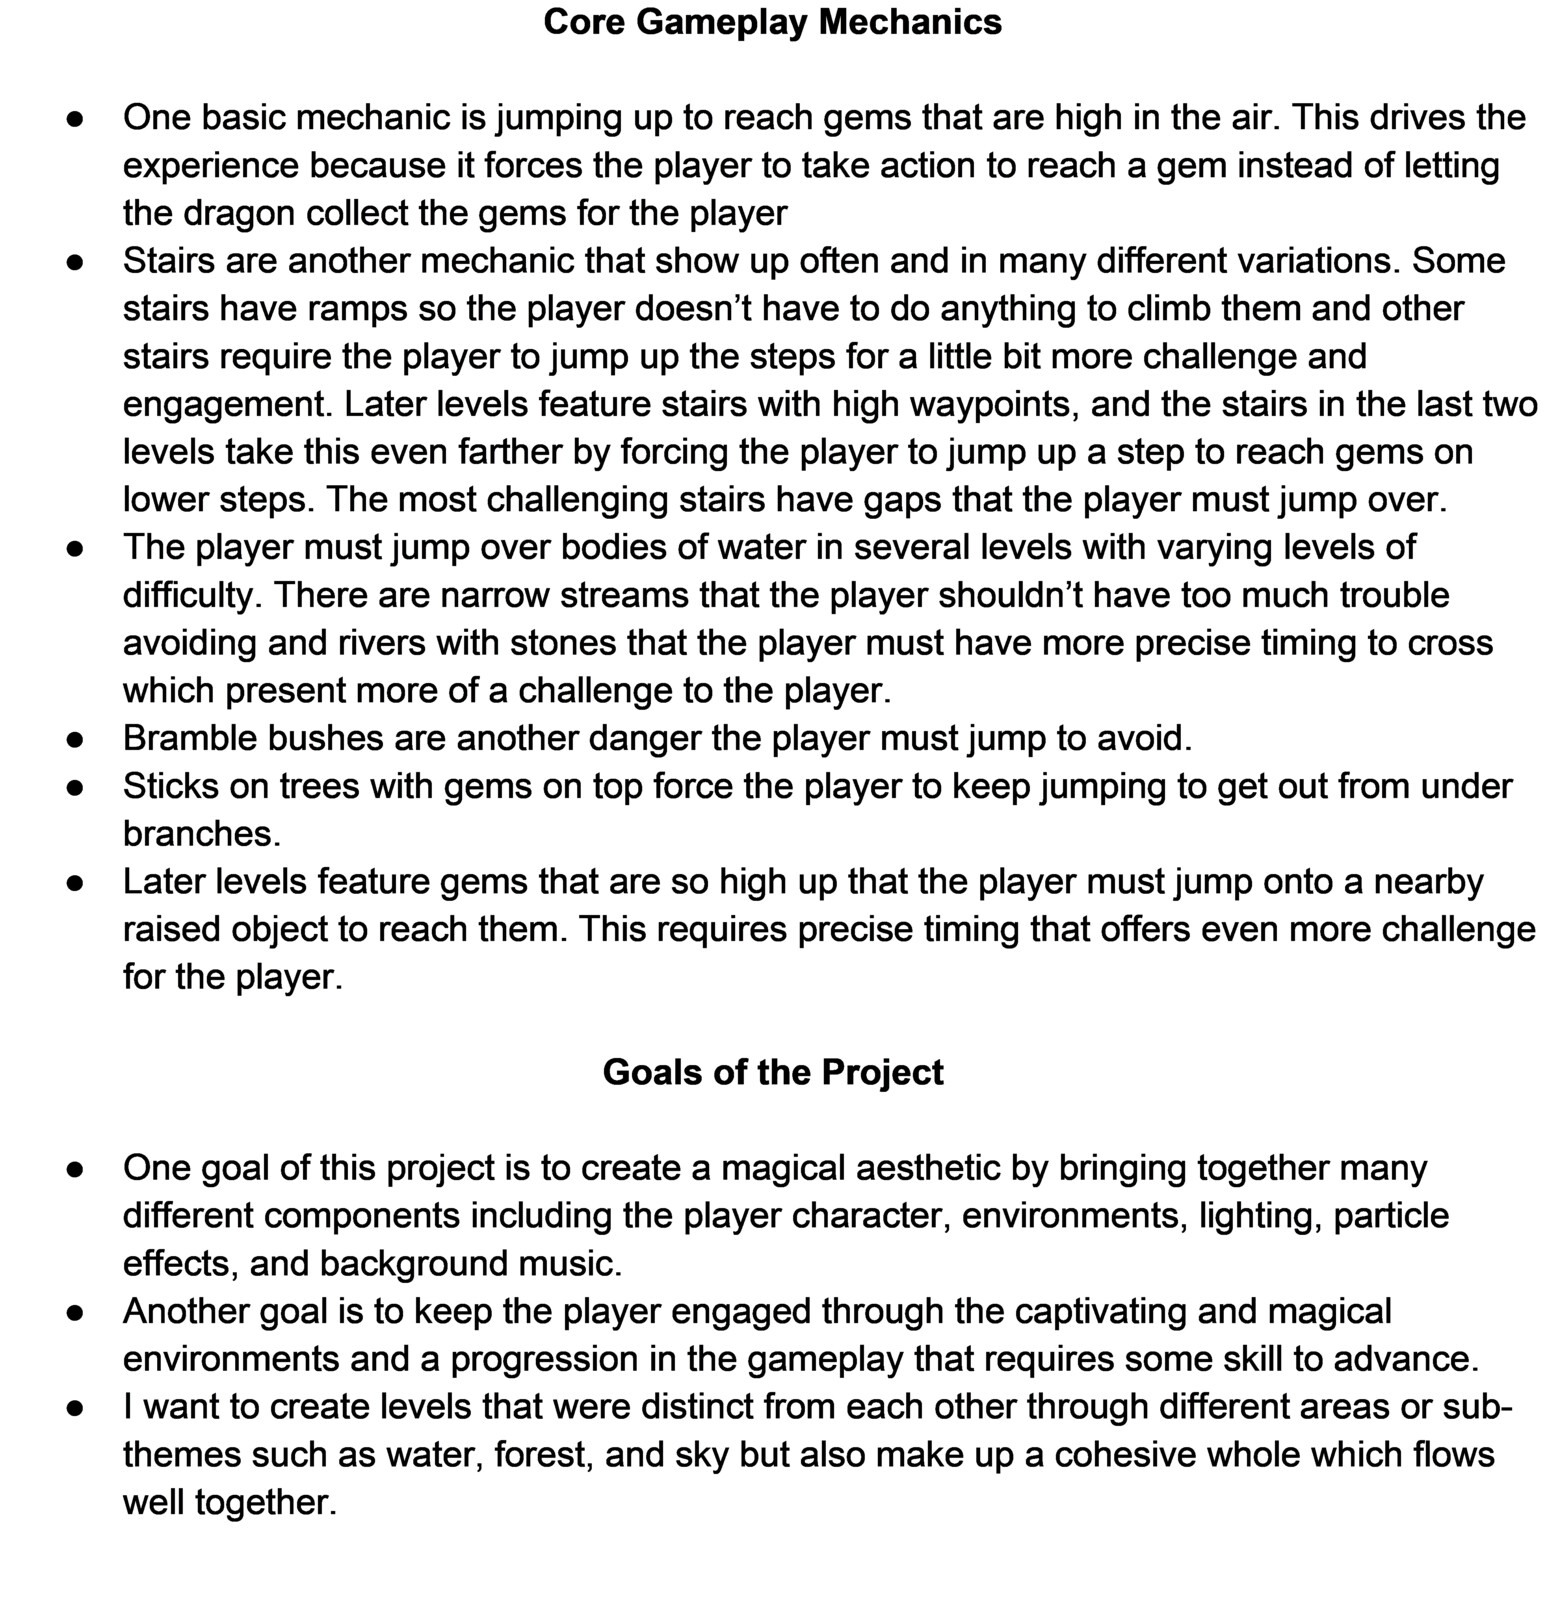 Concept Document- Gameplay and Goals (page 2 of 2)